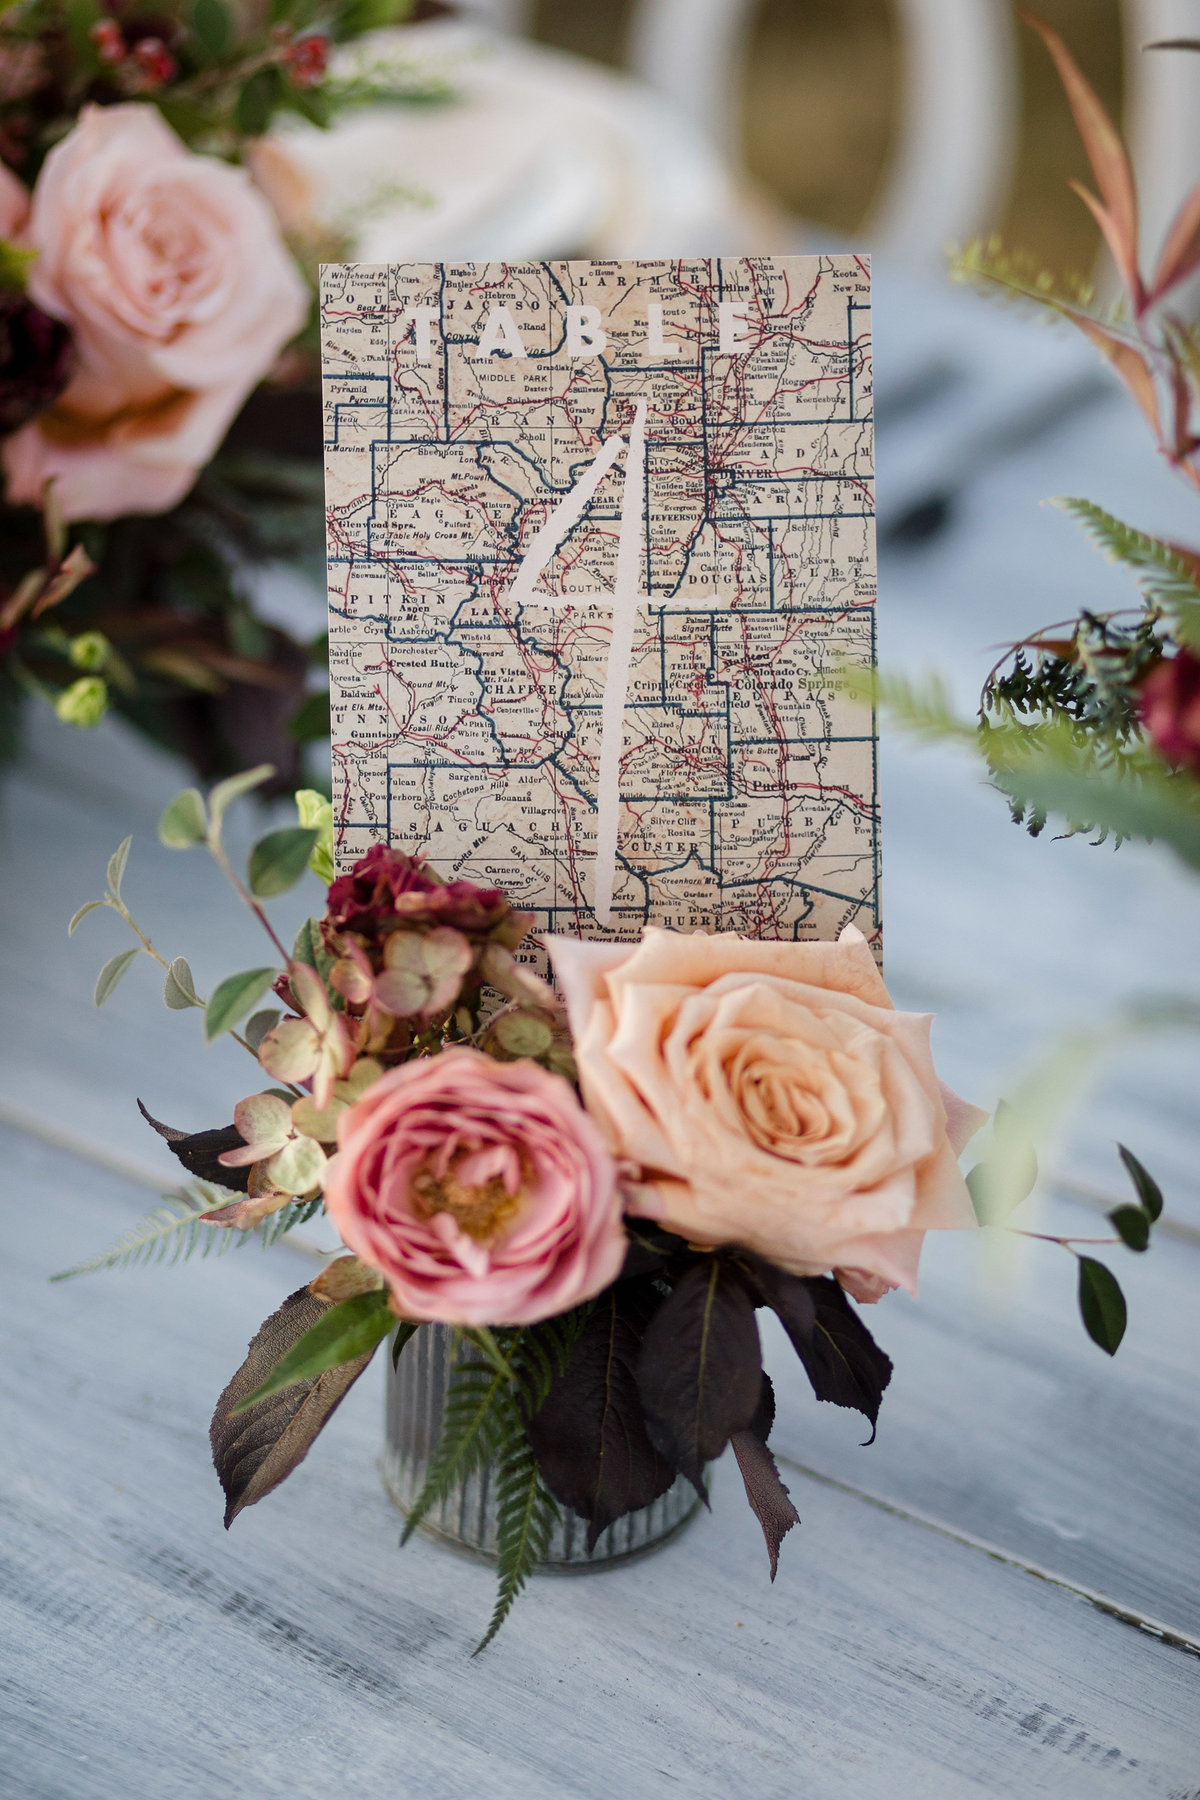 Everett Ranch Weddings  Lucky Onion Stationery Stationary Table Card Vintage Map Salida Colorado Flowers Collegiate Peaks Rustic Ranch Mountain Wedding 015